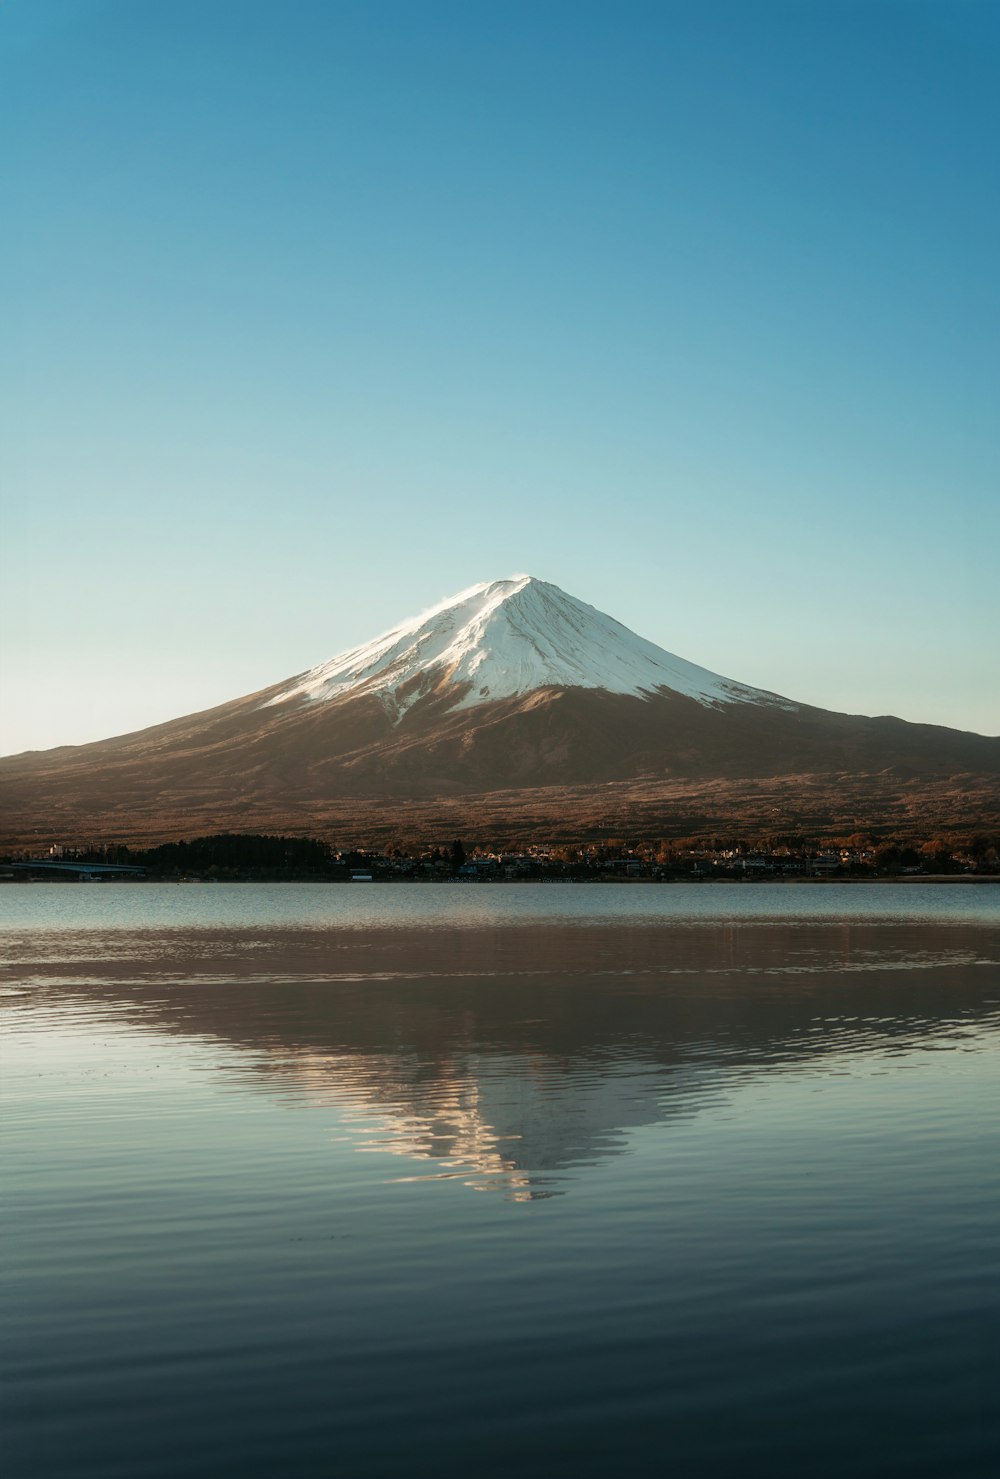 a mountain with a snow capped peak is reflected in the water